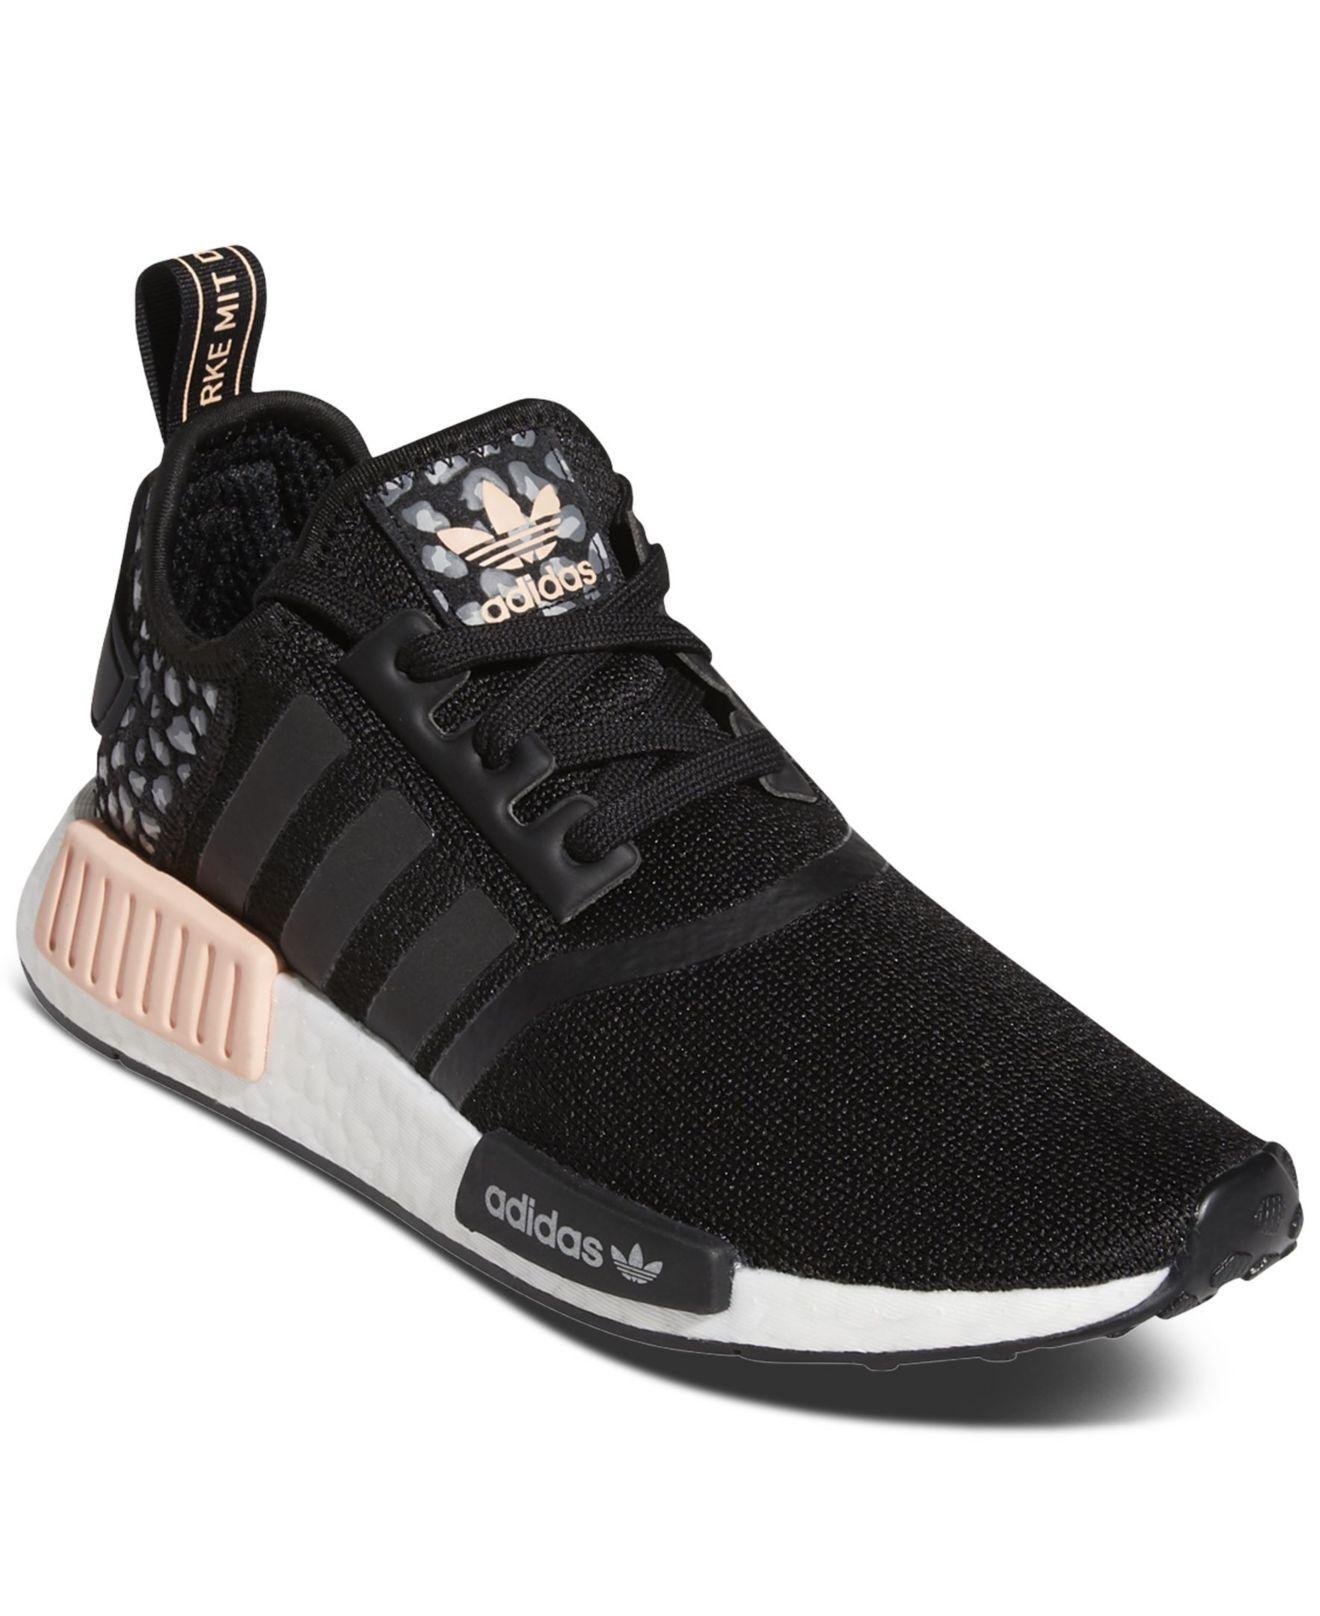 adidas Nmd R1 Animal Print Casual Sneakers From Finish Line Black | Lyst